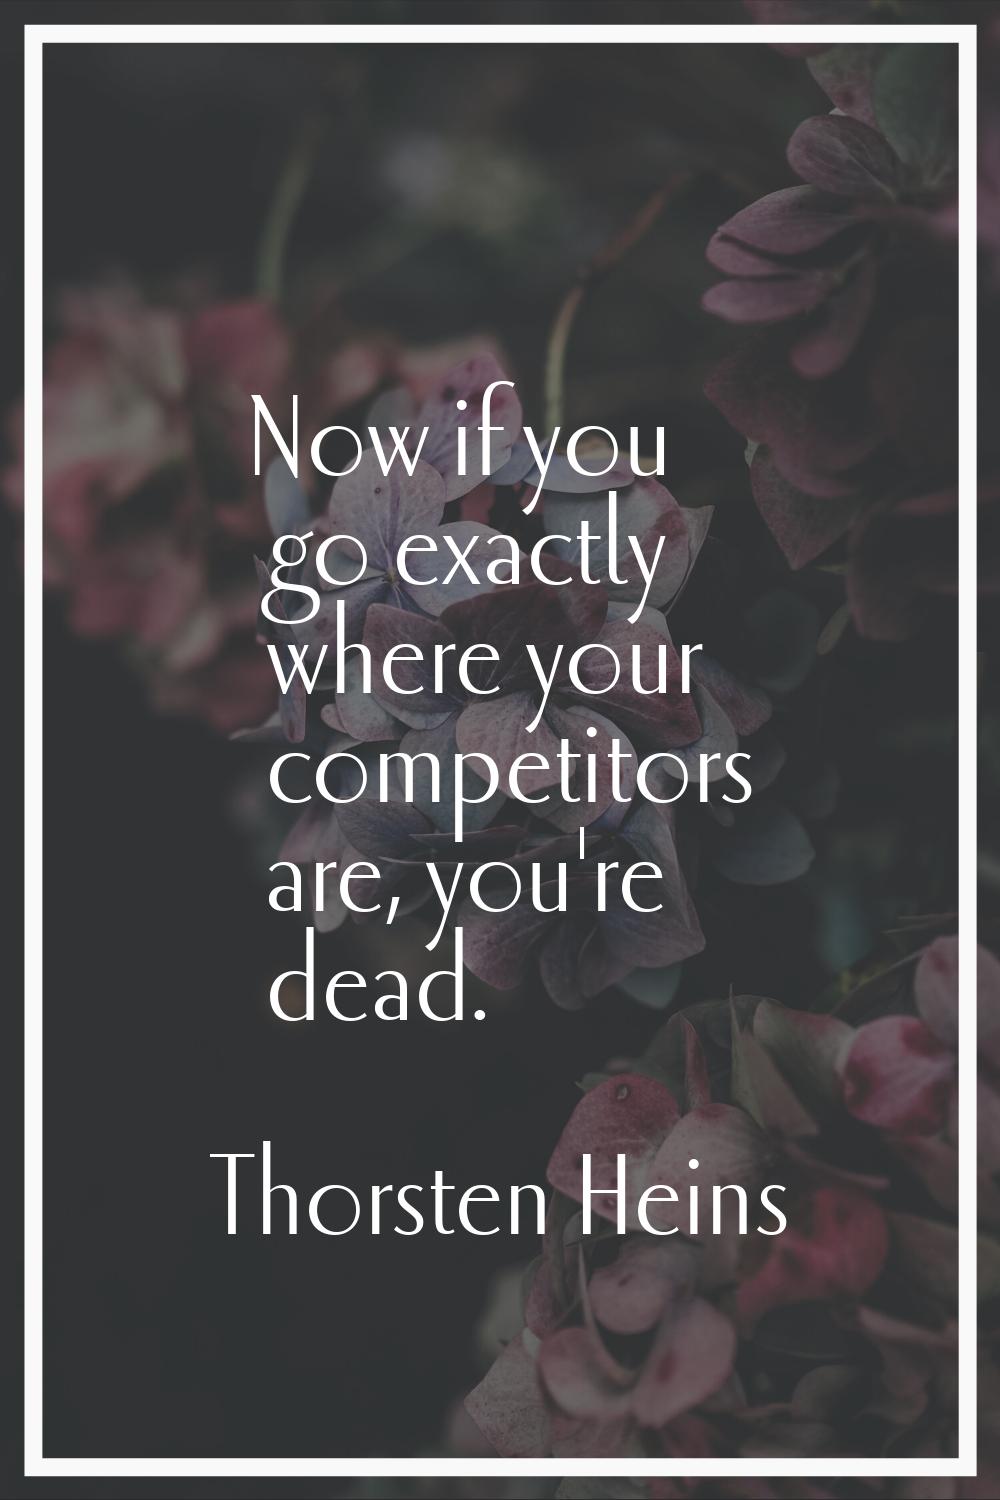 Now if you go exactly where your competitors are, you're dead.